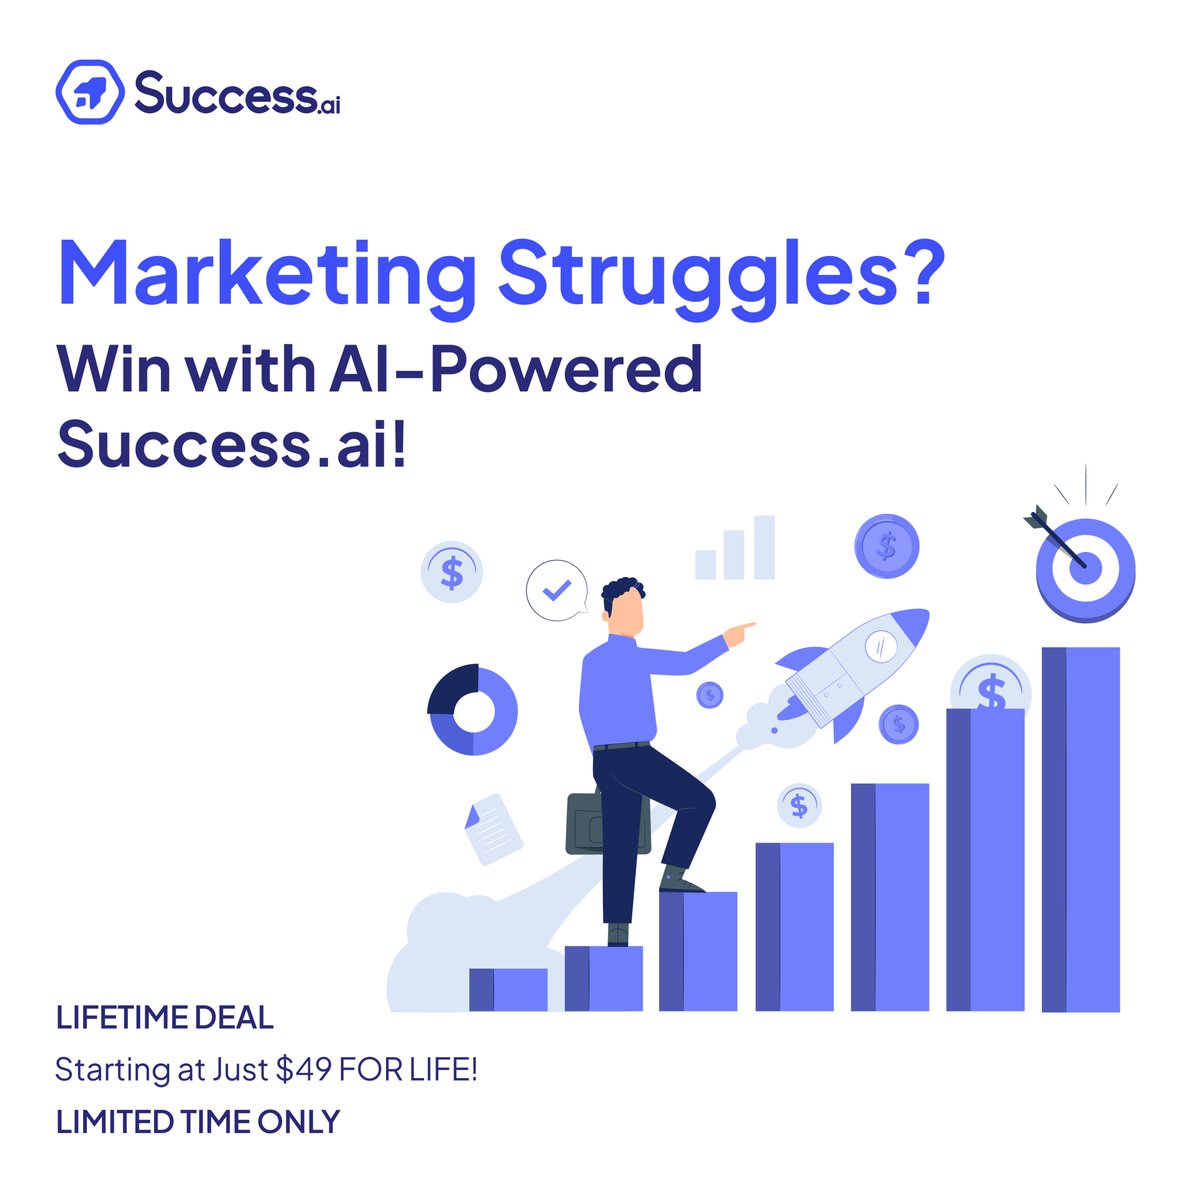 Struggling with marketing?Win with AI-Powered Success.ai! 
Write emails that get noticed.
Attract high-quality leads.
Convert leads into loyal customers.Start seeing results with Success.ai! appsumo.com/products/succe…
#marketingautomation #leadgeneration